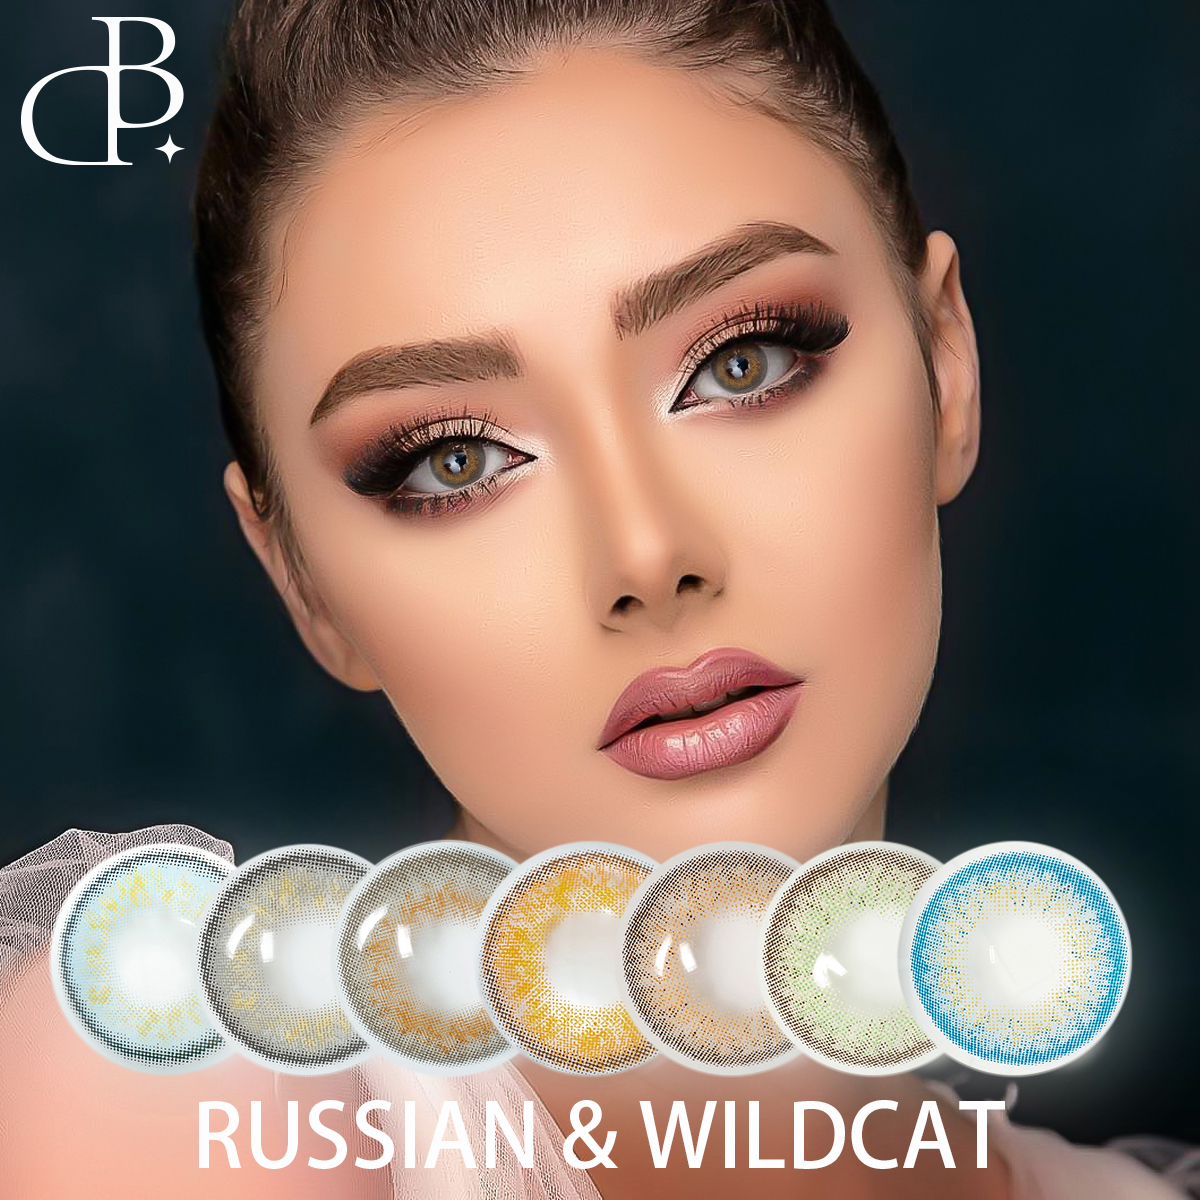 https://www.dblenses.com/russianwild-cat-natural-coloured-eye-lenses-wholesale-soft-coloured-contact-lenses-prescription-contact-lenses-free-shipping-product/